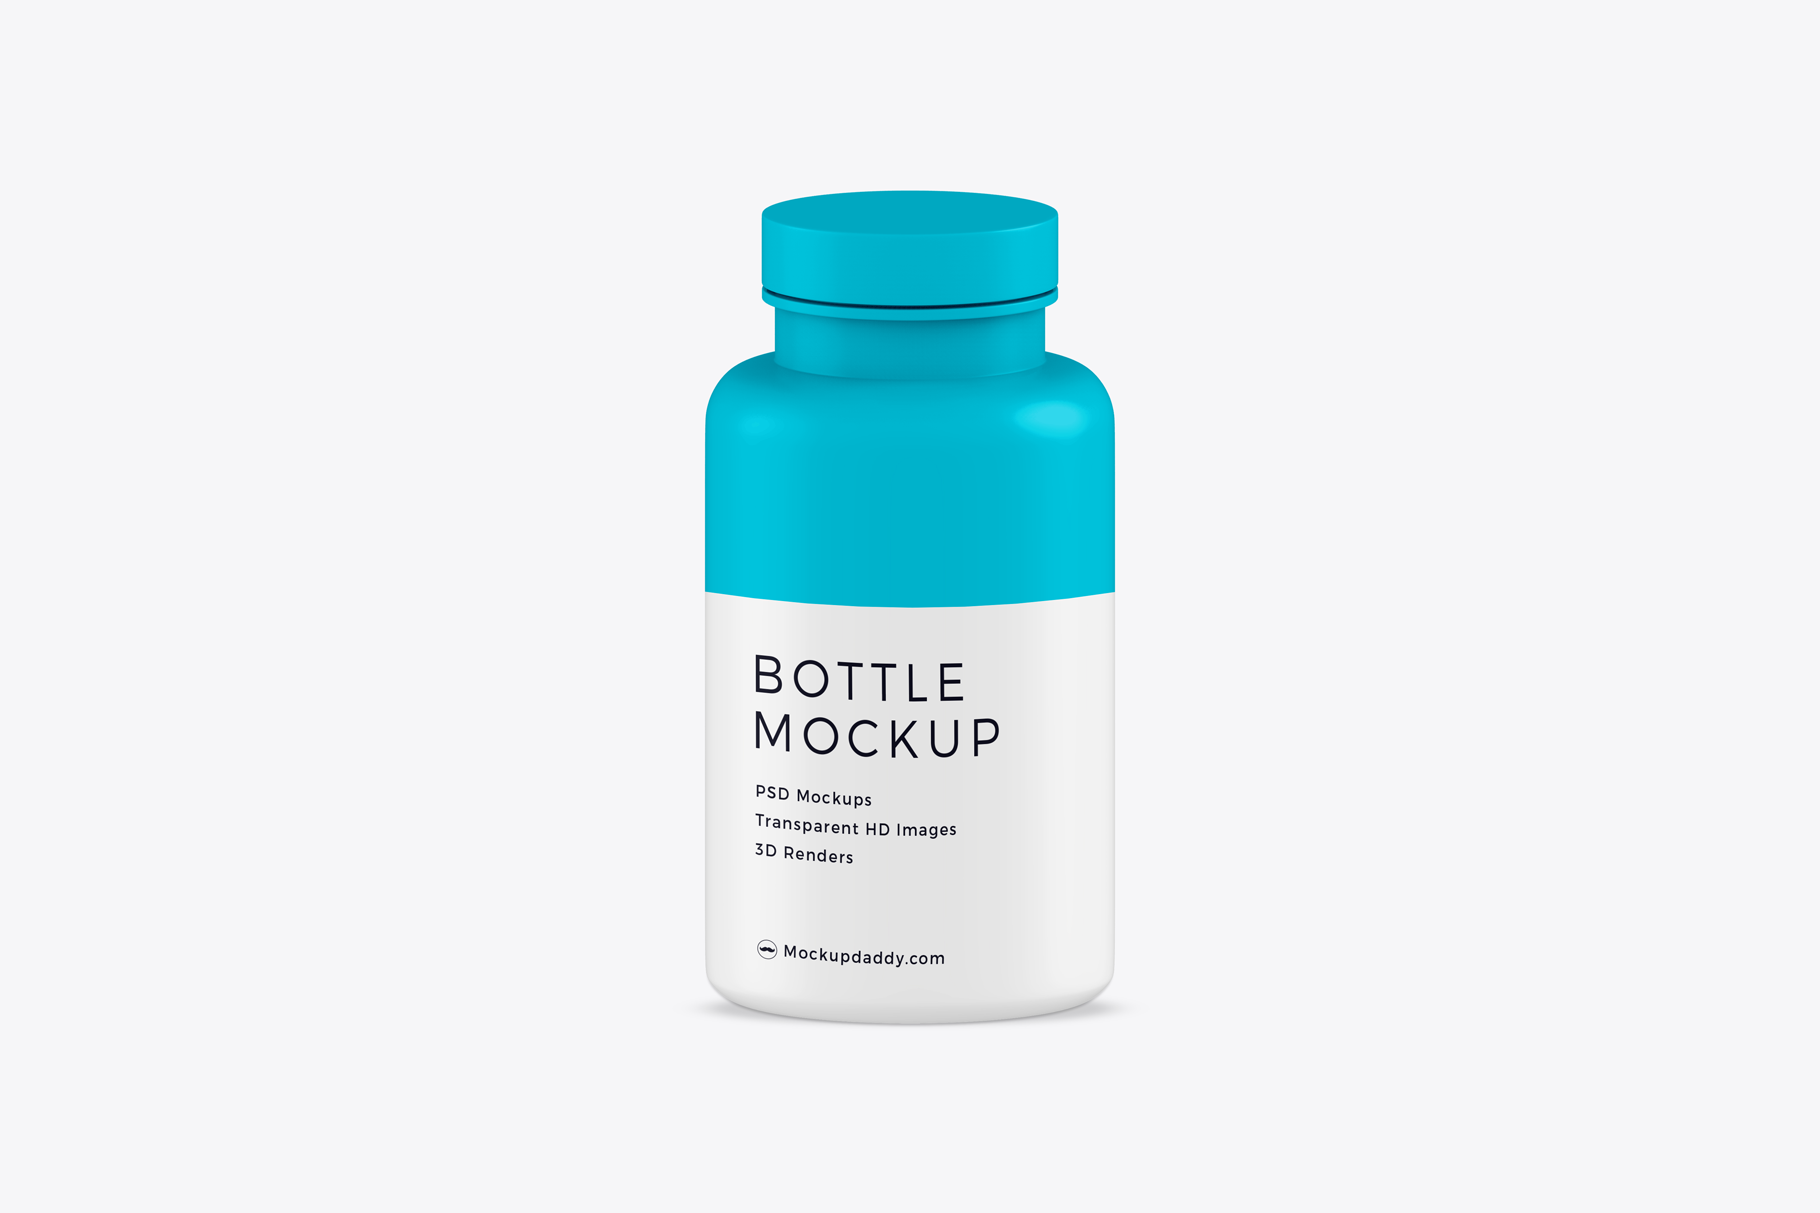 Blue Medical Pills Bottle Mockup with white label with blue cap